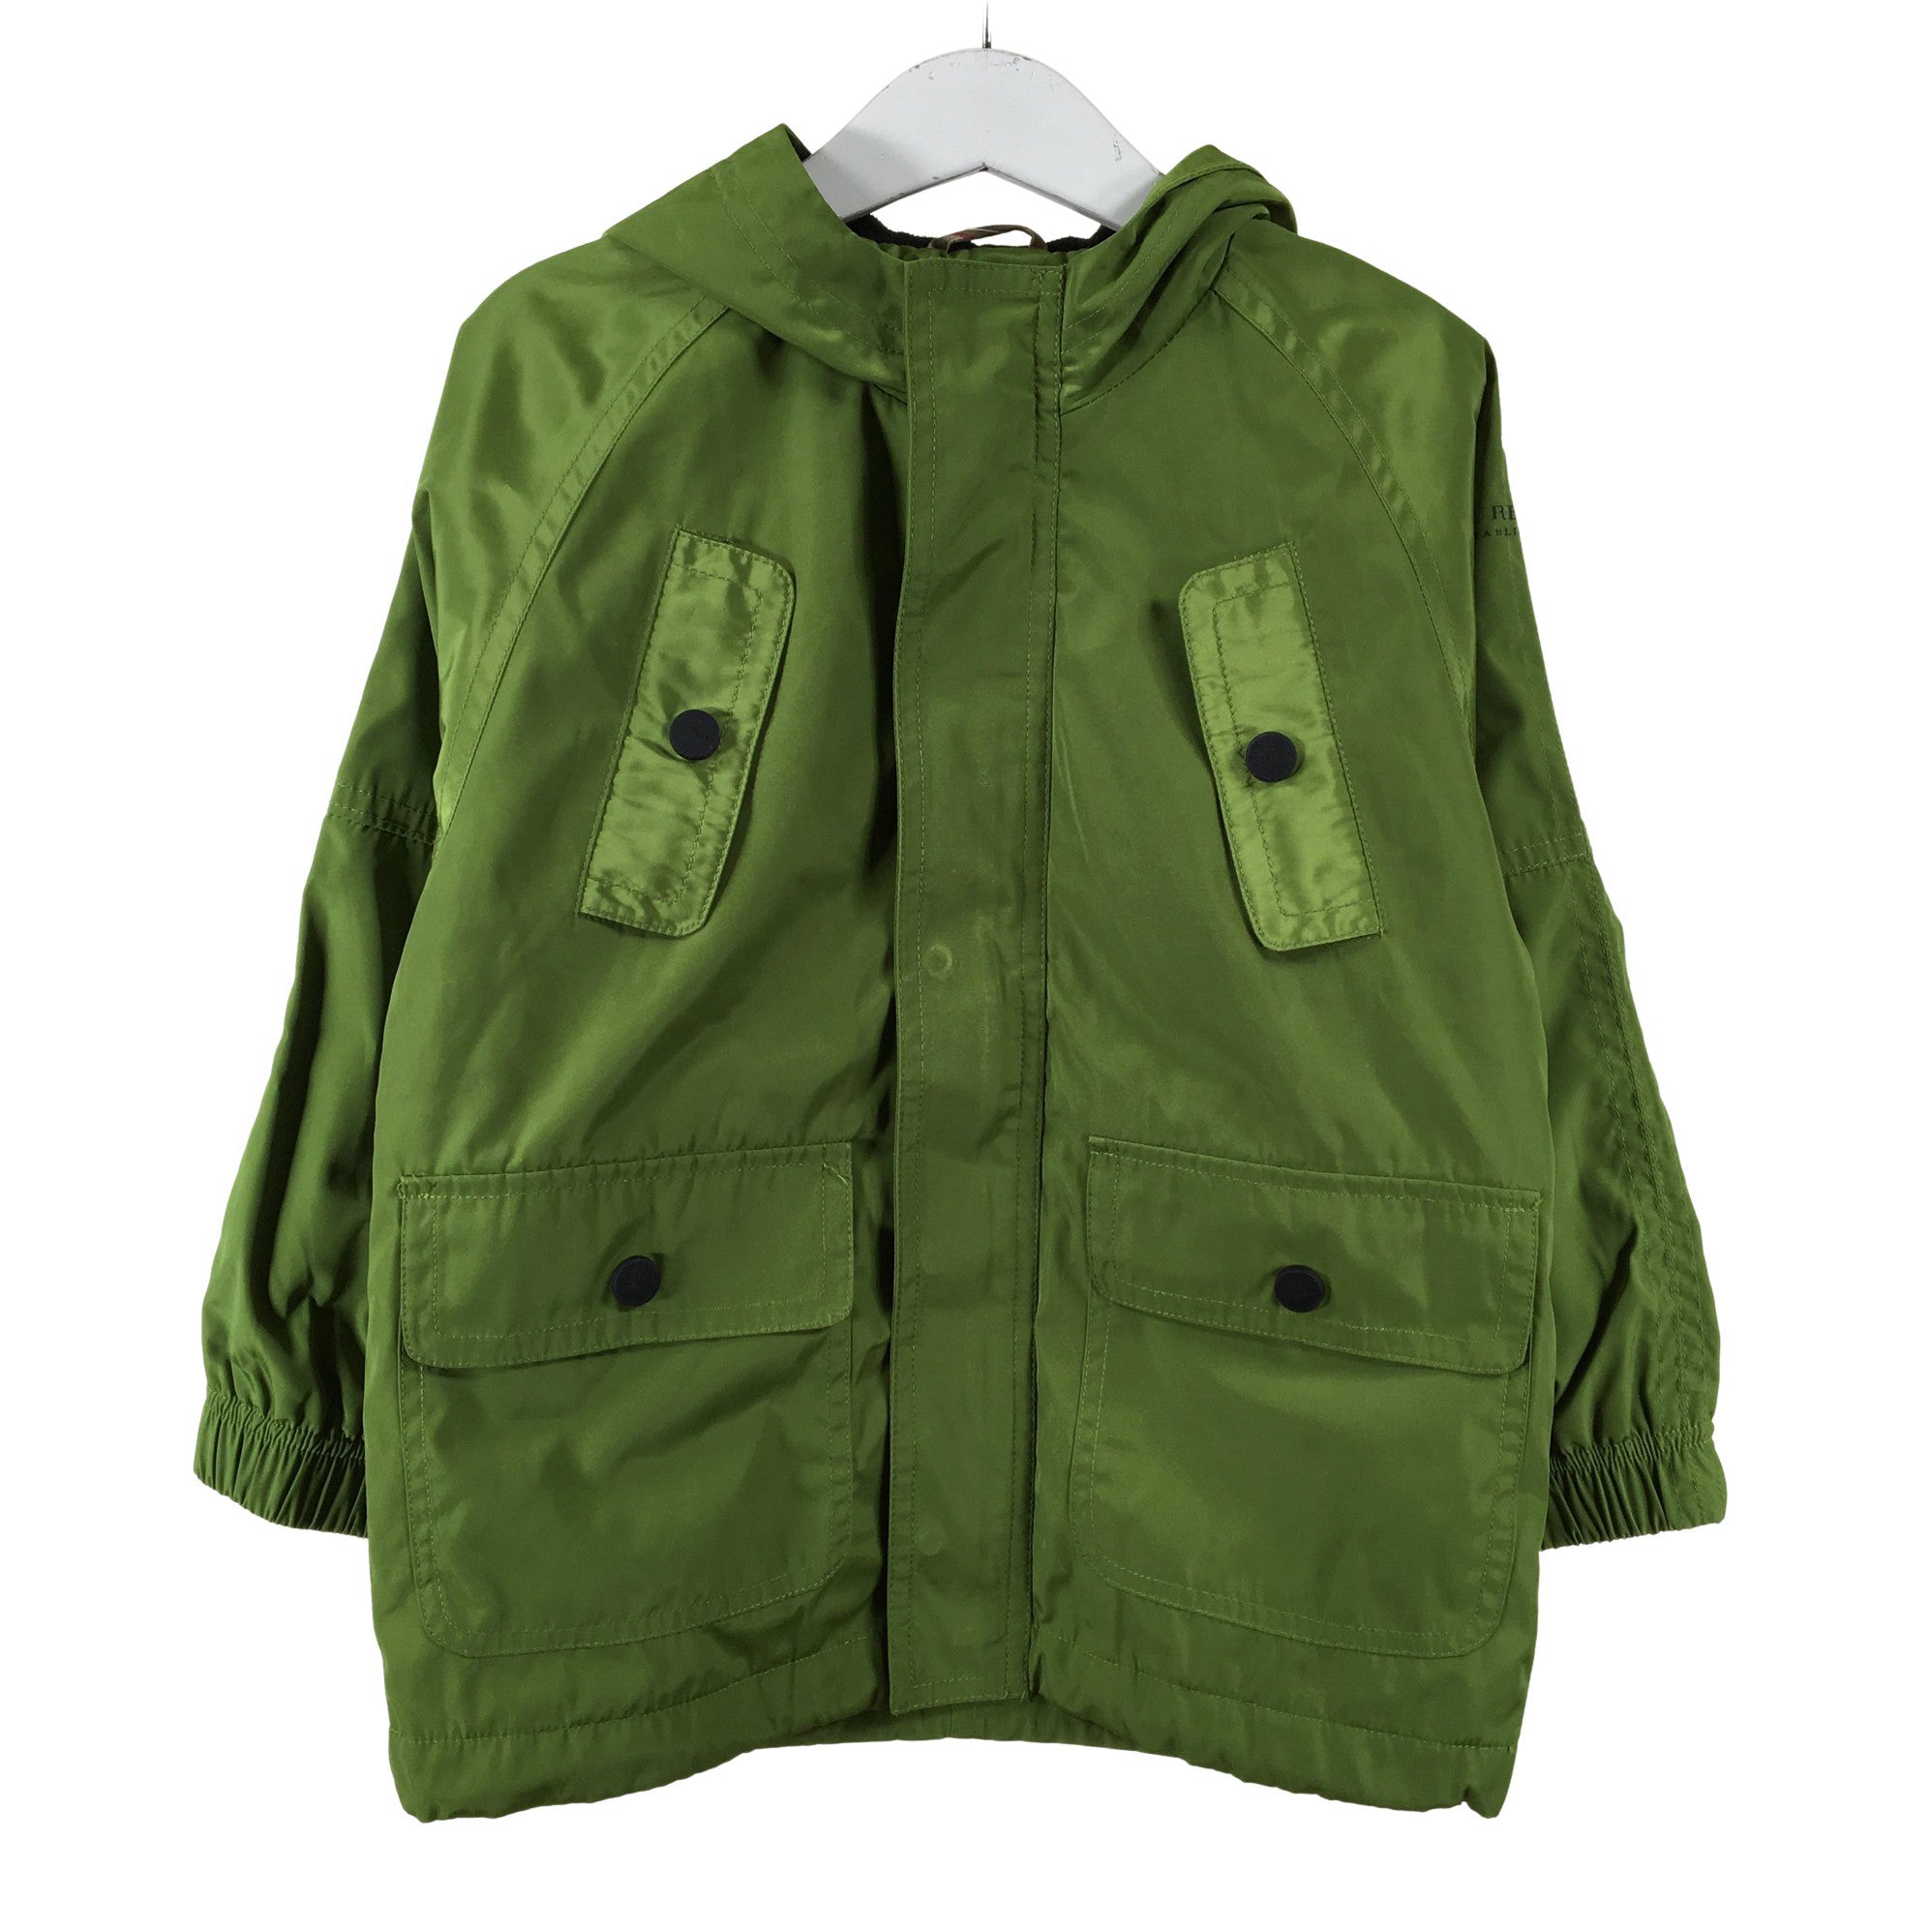 Unisex Burberry Spring/Fall jacket, size 98 - 104 (Green) | Emmy